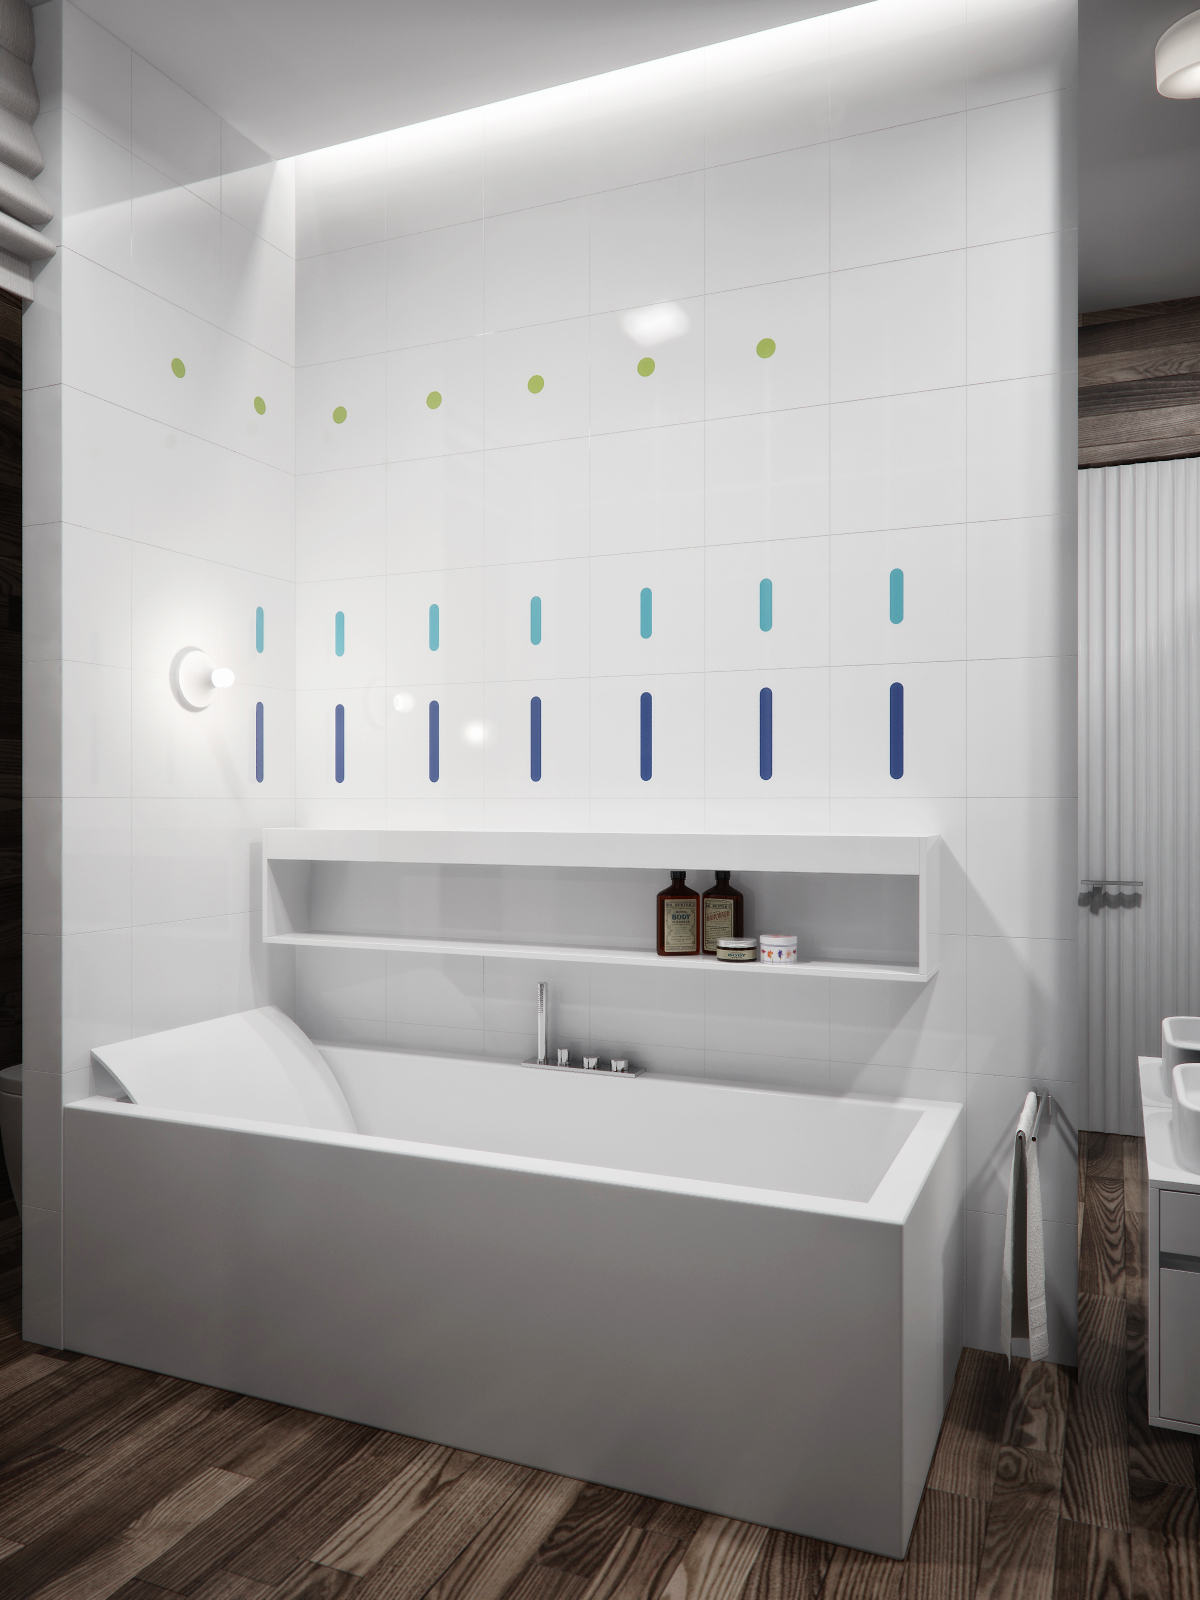 Design ideas for white bathrooms "width =" 1200 "height =" 1600 "srcset =" https://mileray.com/wp-content/uploads/2020/05/Contemporary-Bathroom-Decor-Ideas-Combined-With-Wooden-Accents-Become-a.jpeg 1200w , https://mileray.com/wp-content/uploads/2016/09/Contemporary-white-bathroom-Azovskiy-Pahomova-Architects-225x300.jpeg 225w, https://mileray.com/wp-content/uploads/ 2016/09 / Contemporary-white-bathroom-Azovskiy-Pahomova-Architects-768x1024.jpeg 768w, https://mileray.com/wp-content/uploads/2016/09/Contemporary-white-bathroom-Azovskiy-Pahomova-Architects -696x928.jpeg 696w, https://mileray.com/wp-content/uploads/2016/09/Contemporary-white-bathroom-Azovskiy-Pahomova-Architects-1068x1424.jpeg 1068w, https://mileray.com/wp -content / uploads / 2016/09 / Contemporary-white-bathroom-Azovskiy-Pahomova-Architects-315x420.jpeg 315w "sizes =" (maximum width: 1200px) 100vw, 1200px